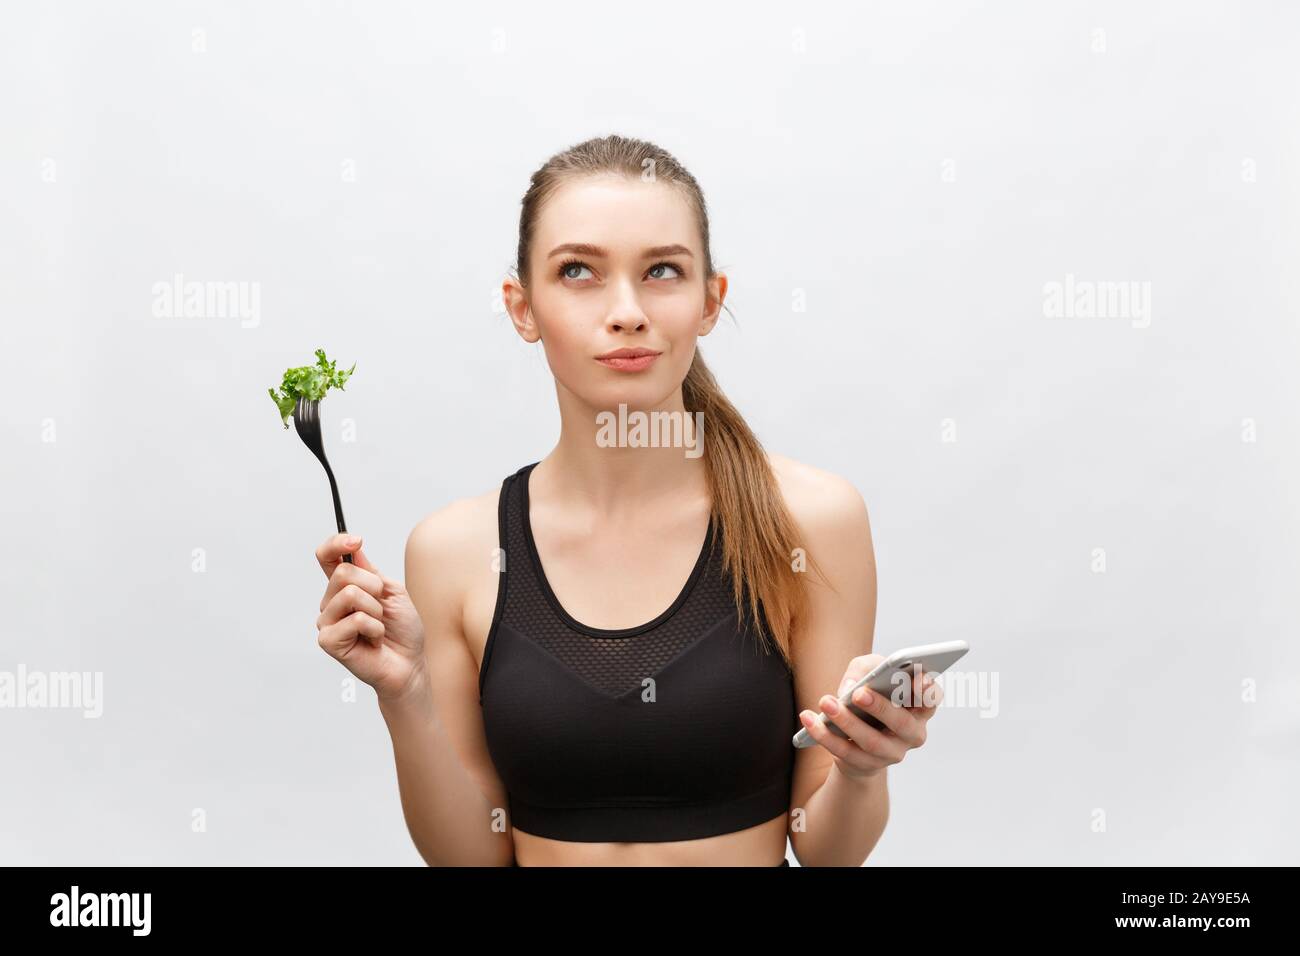 Beautiful young woman wearing sport clothes with salad in hand, using smart phone. Stock Photo